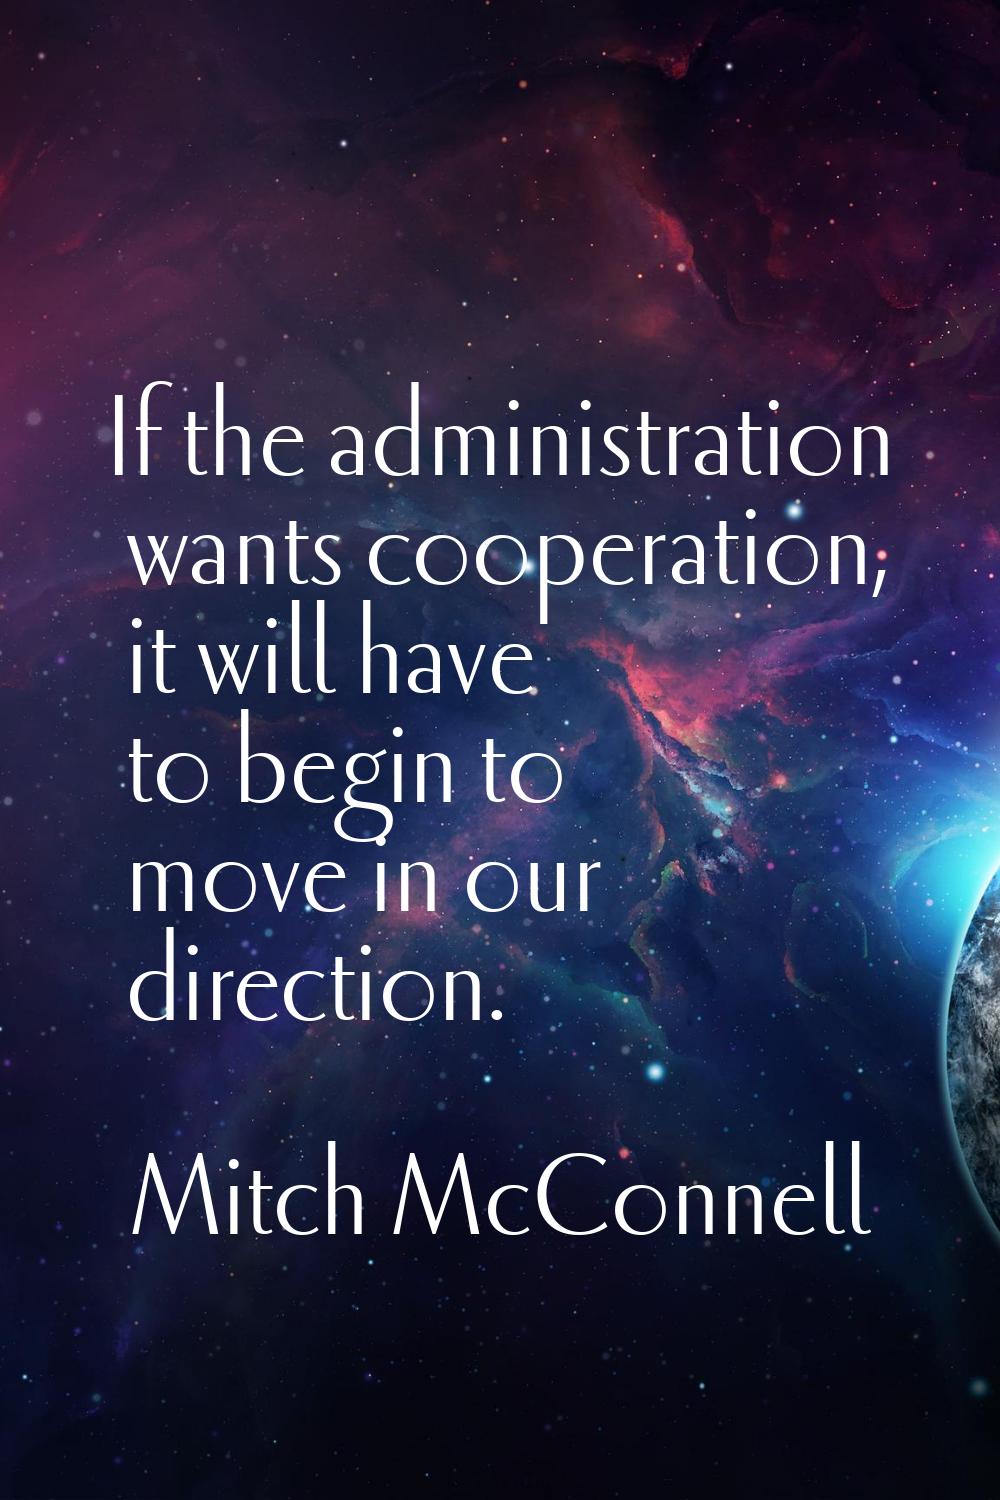 If the administration wants cooperation, it will have to begin to move in our direction.